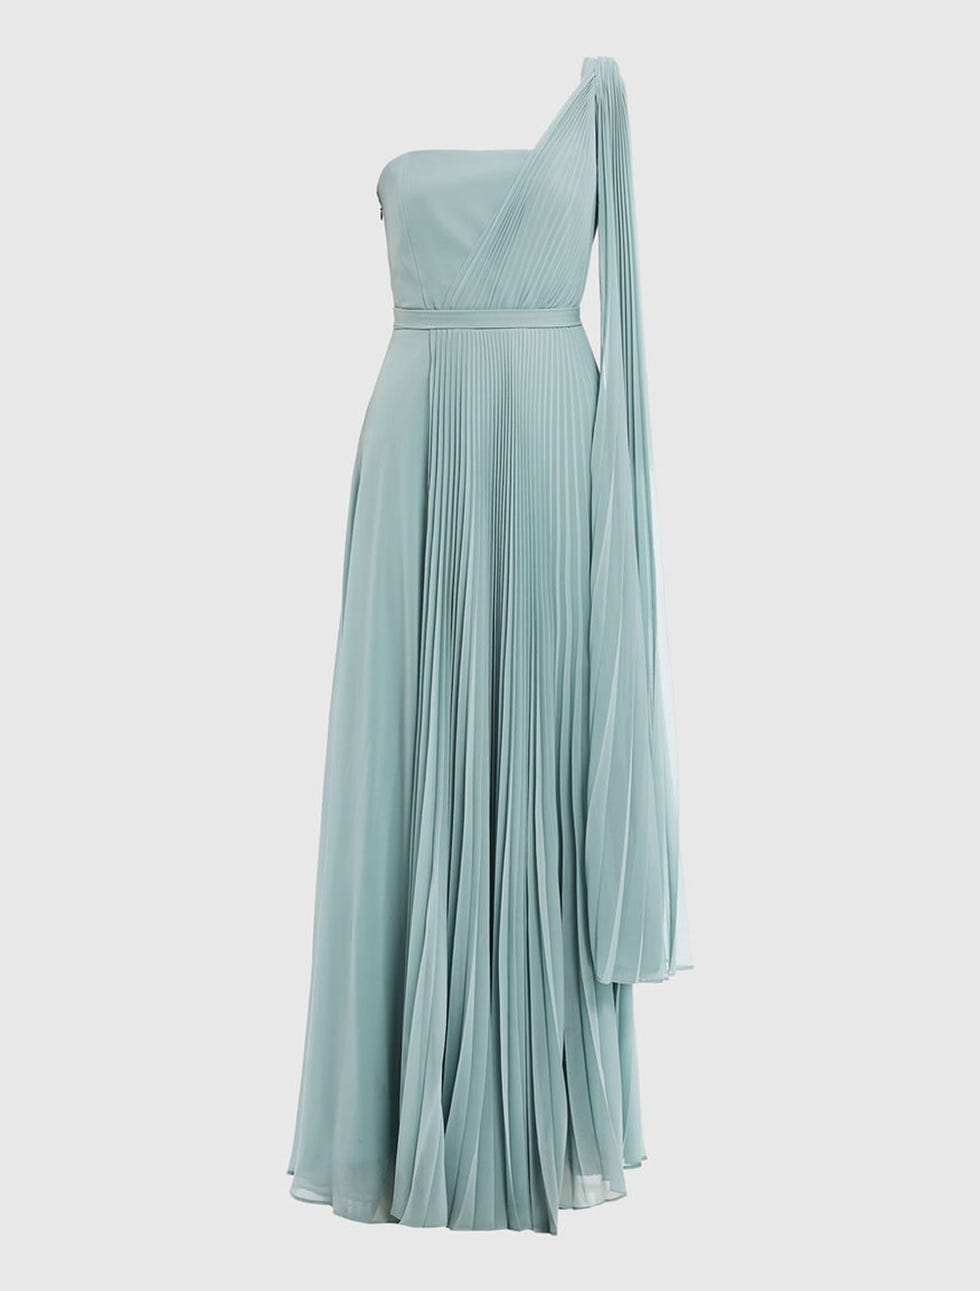 Clothing, Dress, Shoulder, Day dress, Aqua, Green, Turquoise, Gown, Cocktail dress, A-line, 